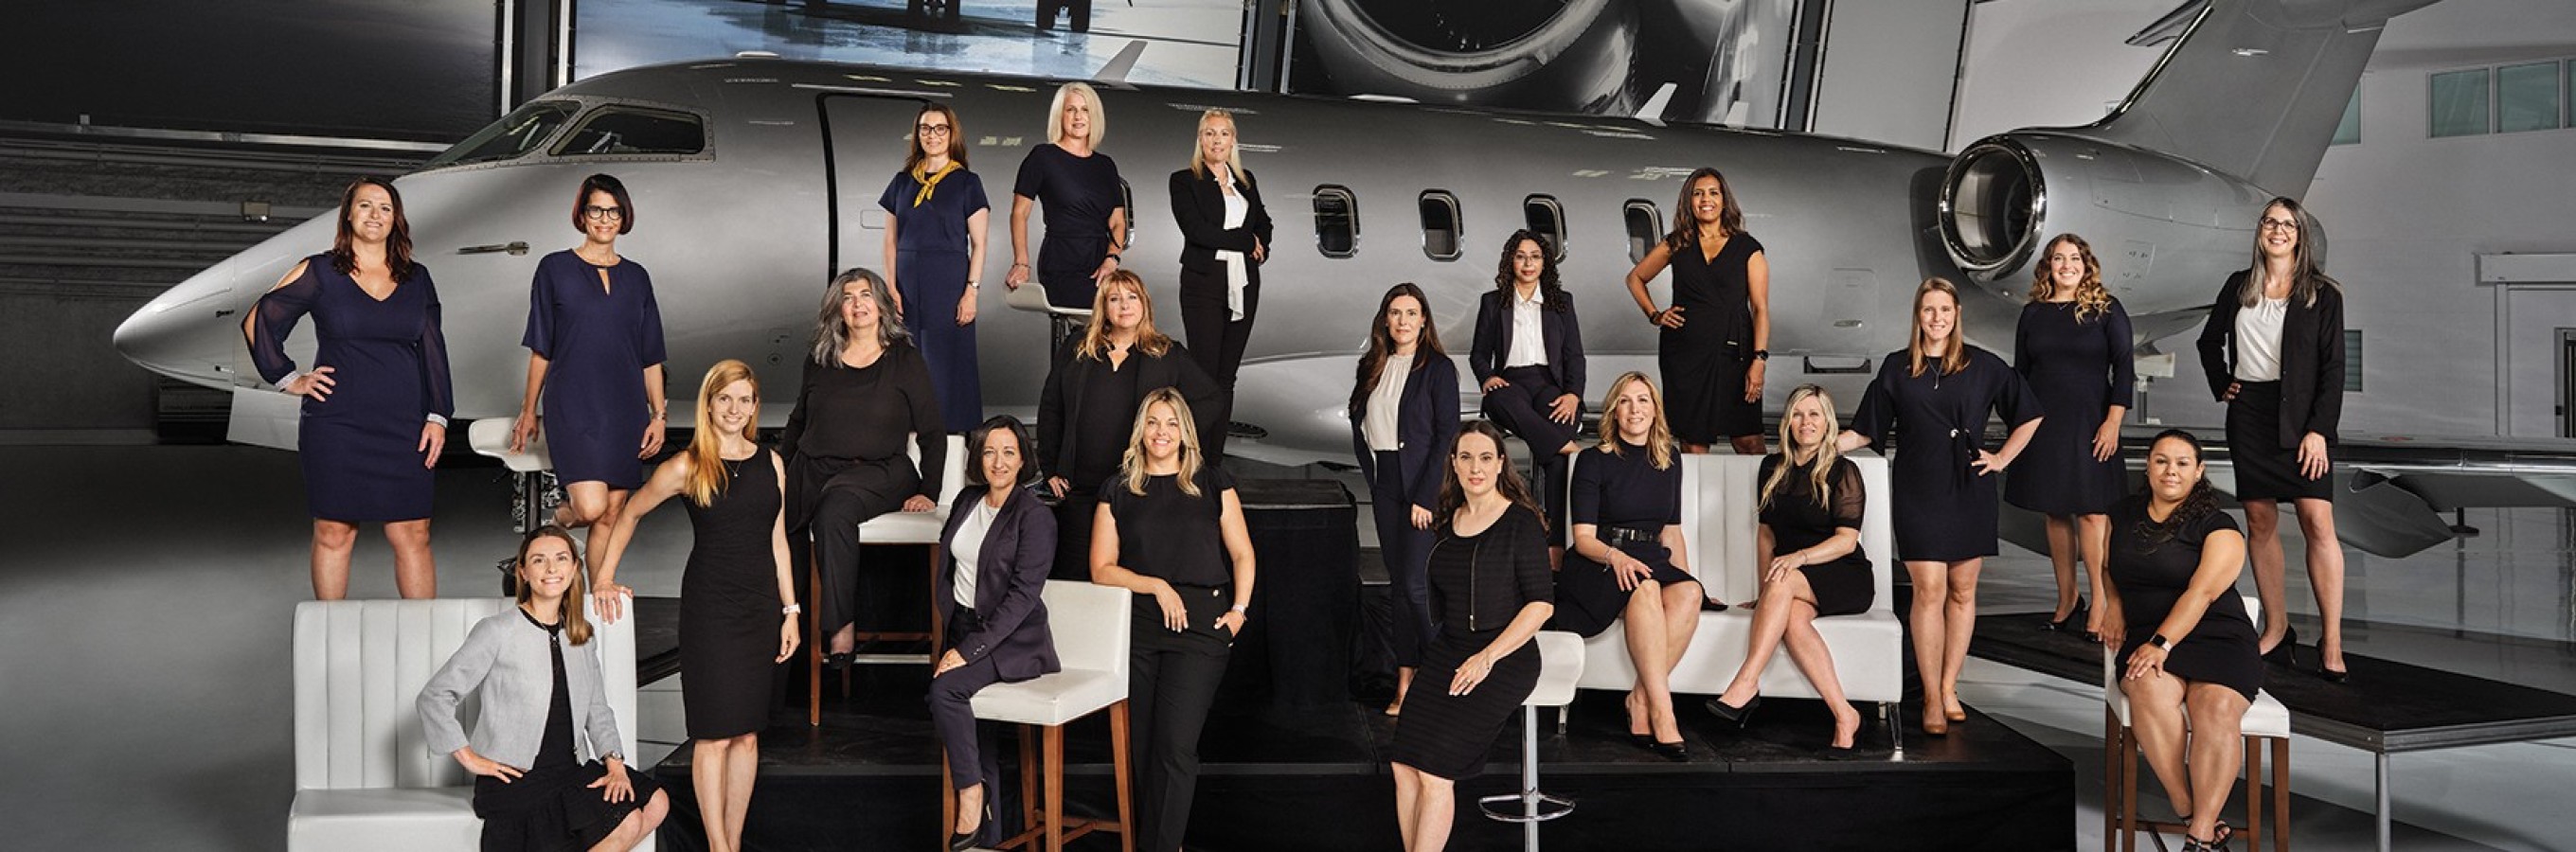 Making change in numbers: Innovative women at Bombardier